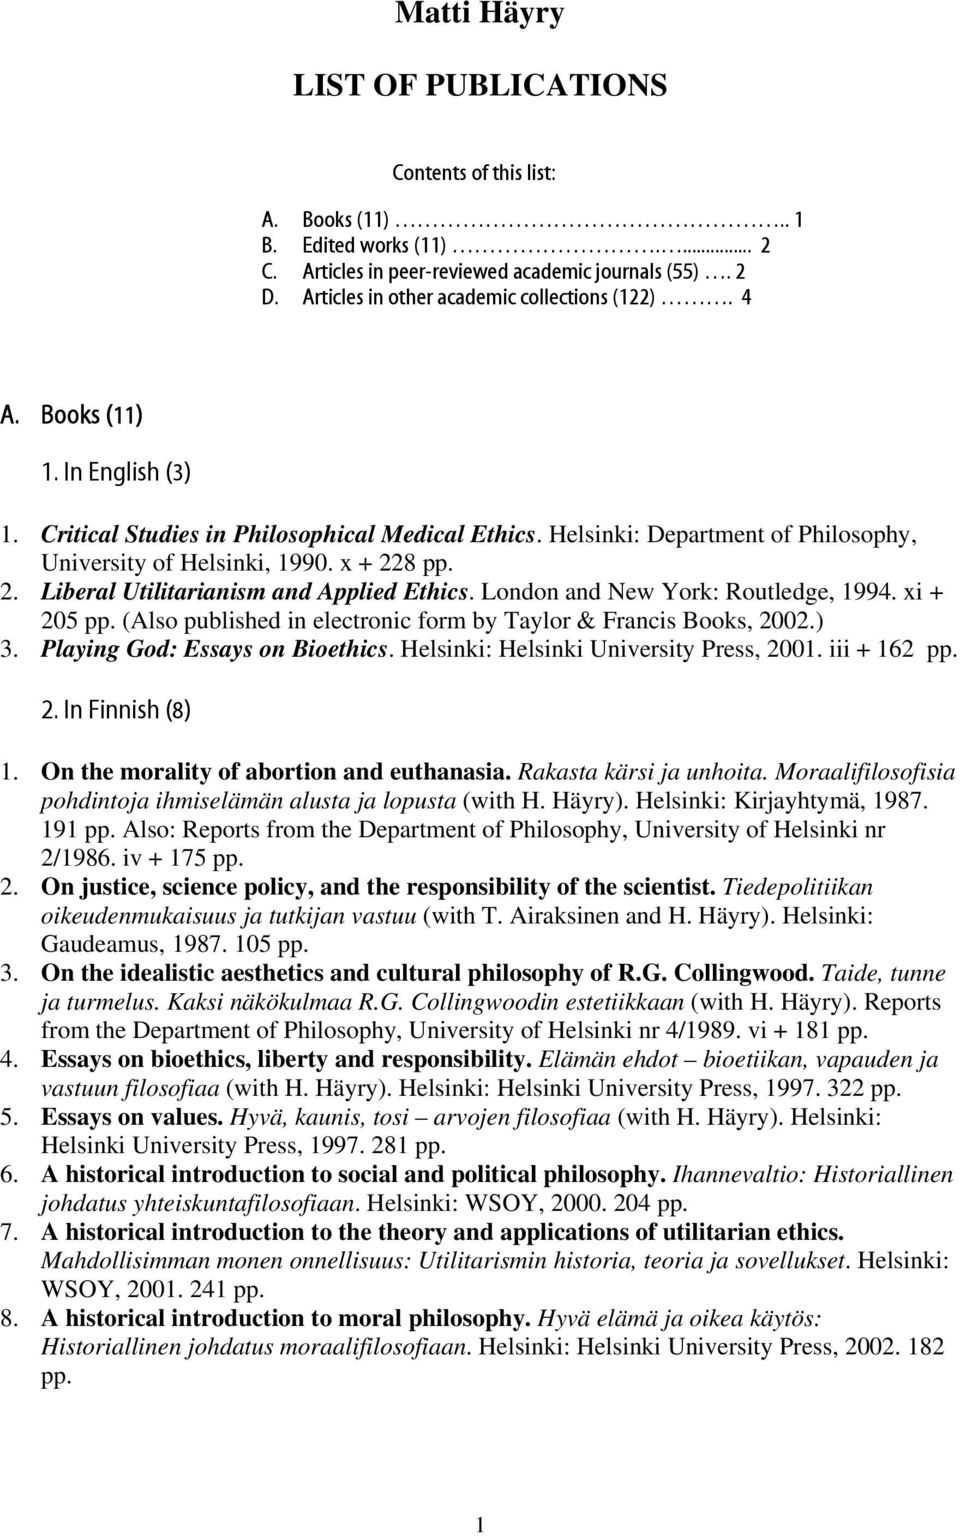 x + 228 pp. 2. Liberal Utilitarianism and Applied Ethics. London and New York: Routledge, 1994. xi + 205 pp. (Also published in electronic form by Taylor & Francis Books, 2002.) 3.